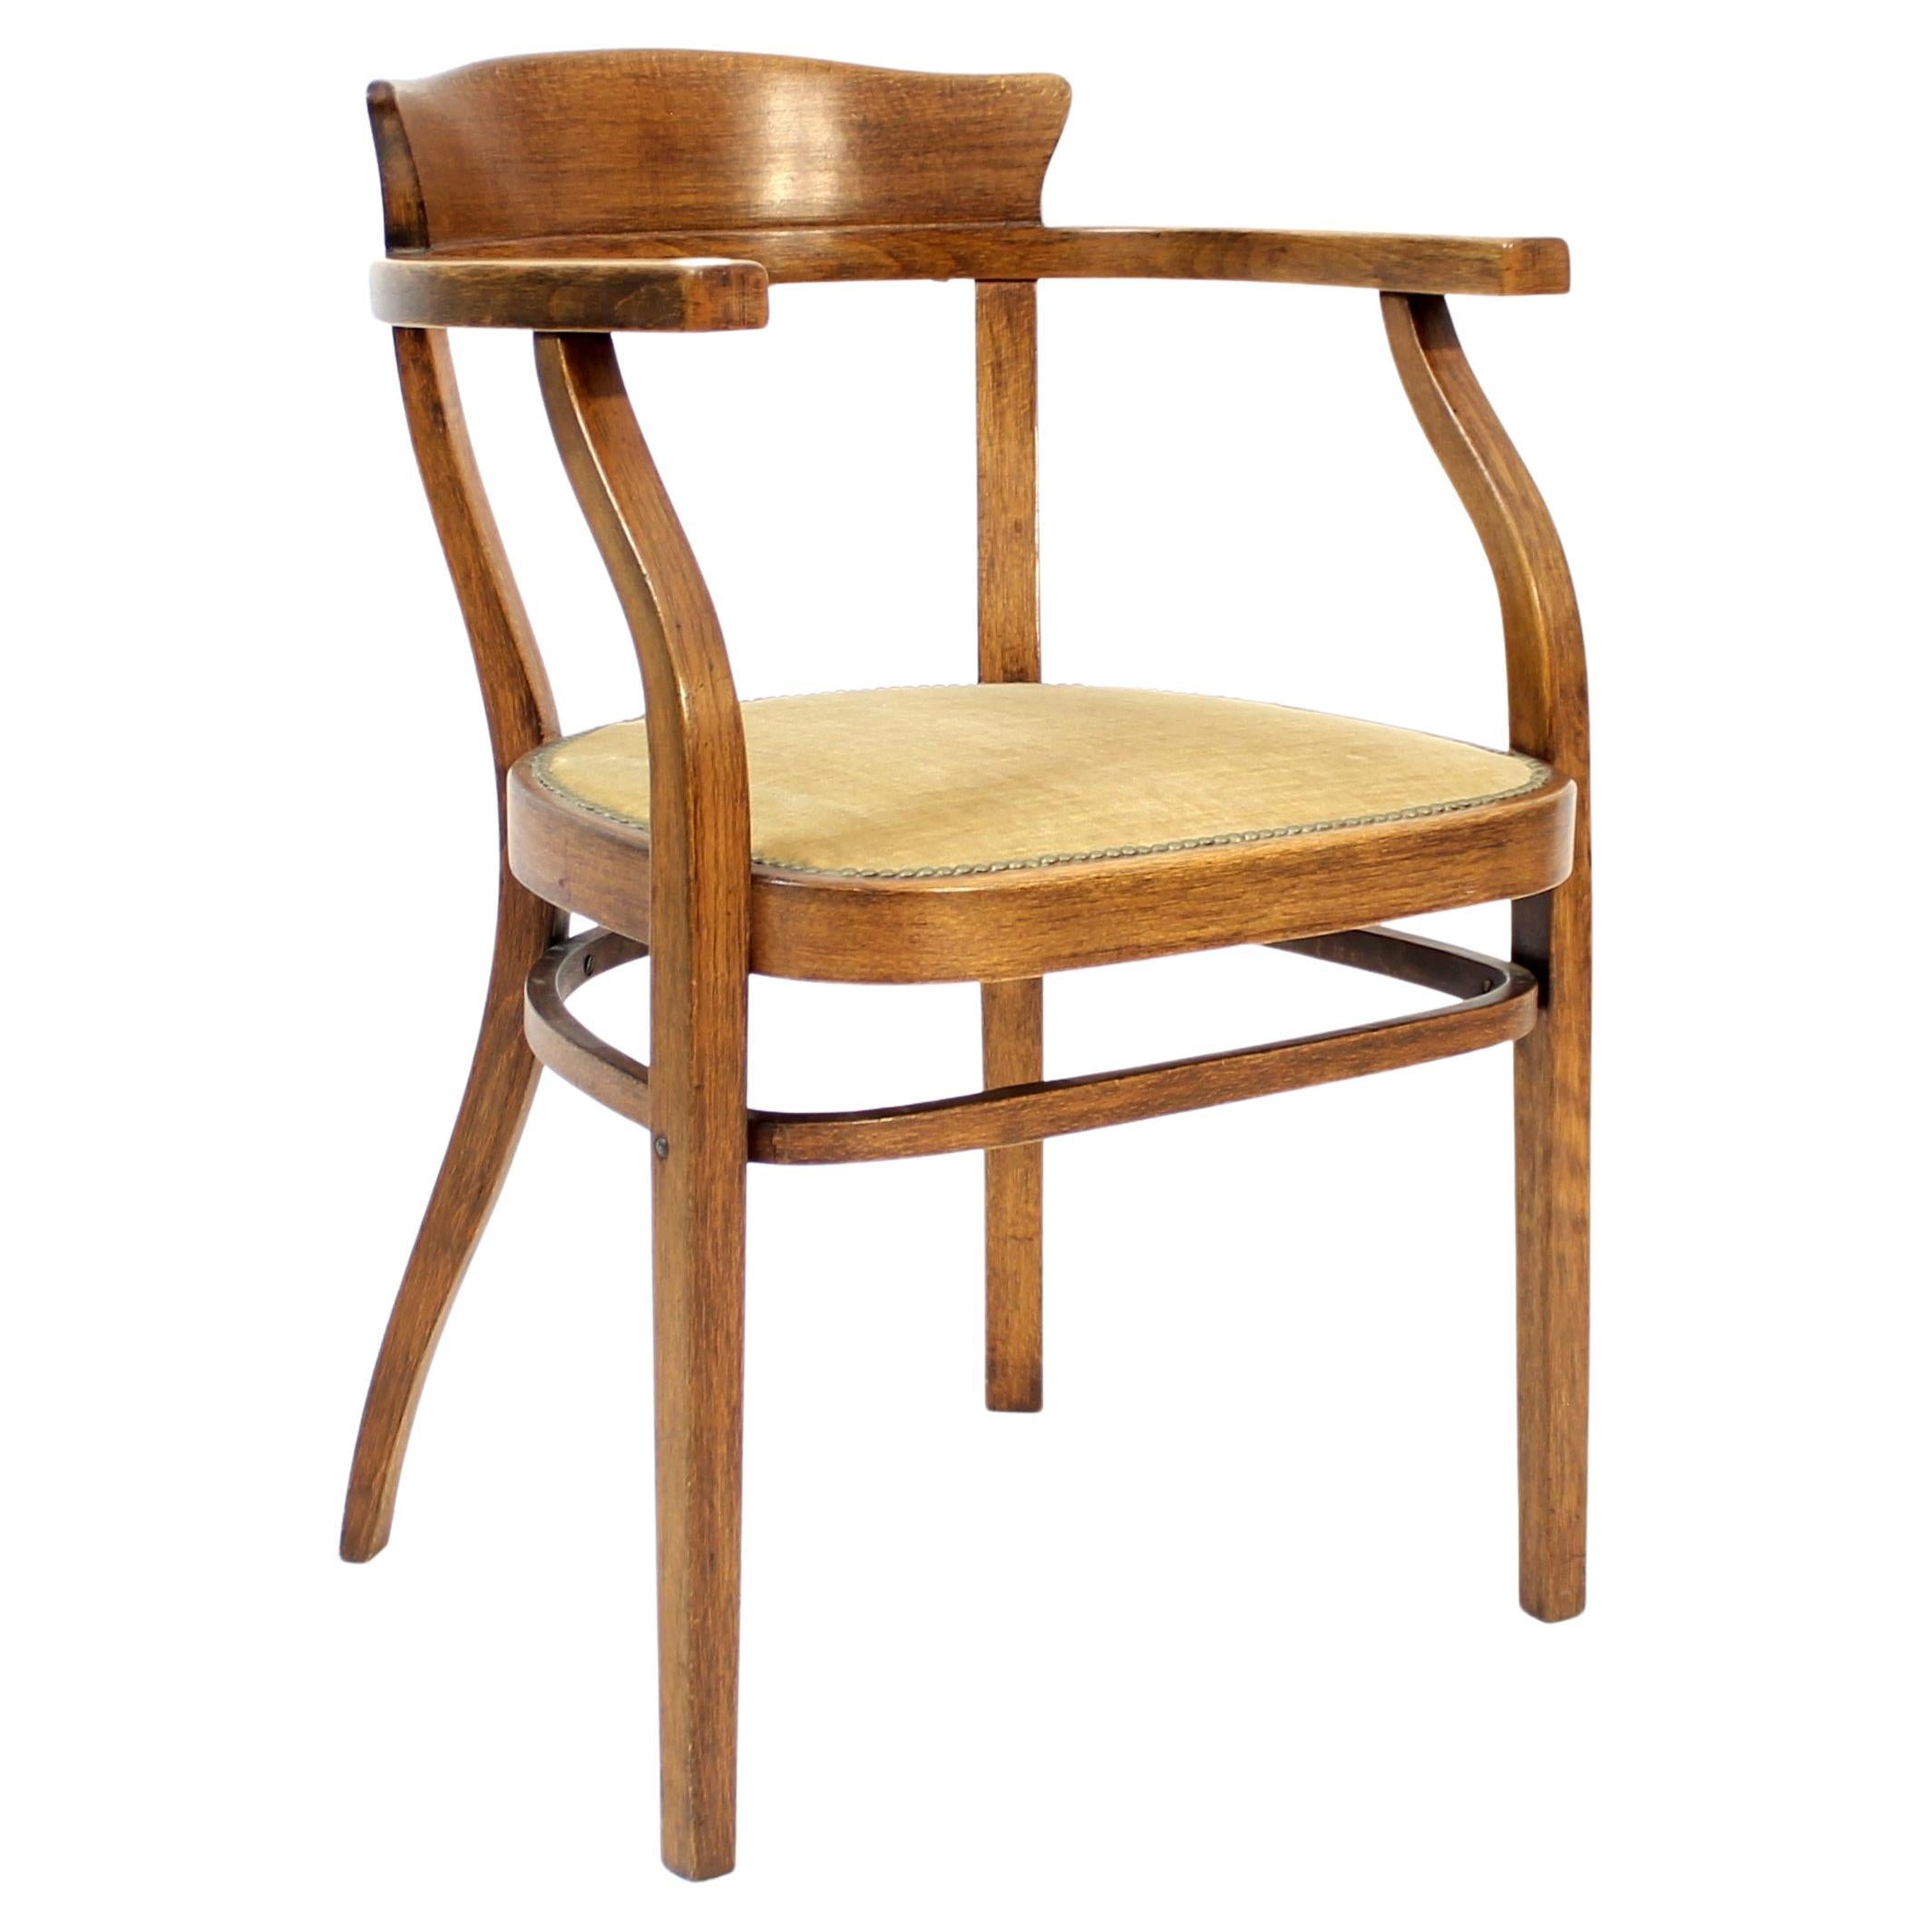 How do you pronounce Thonet chair?